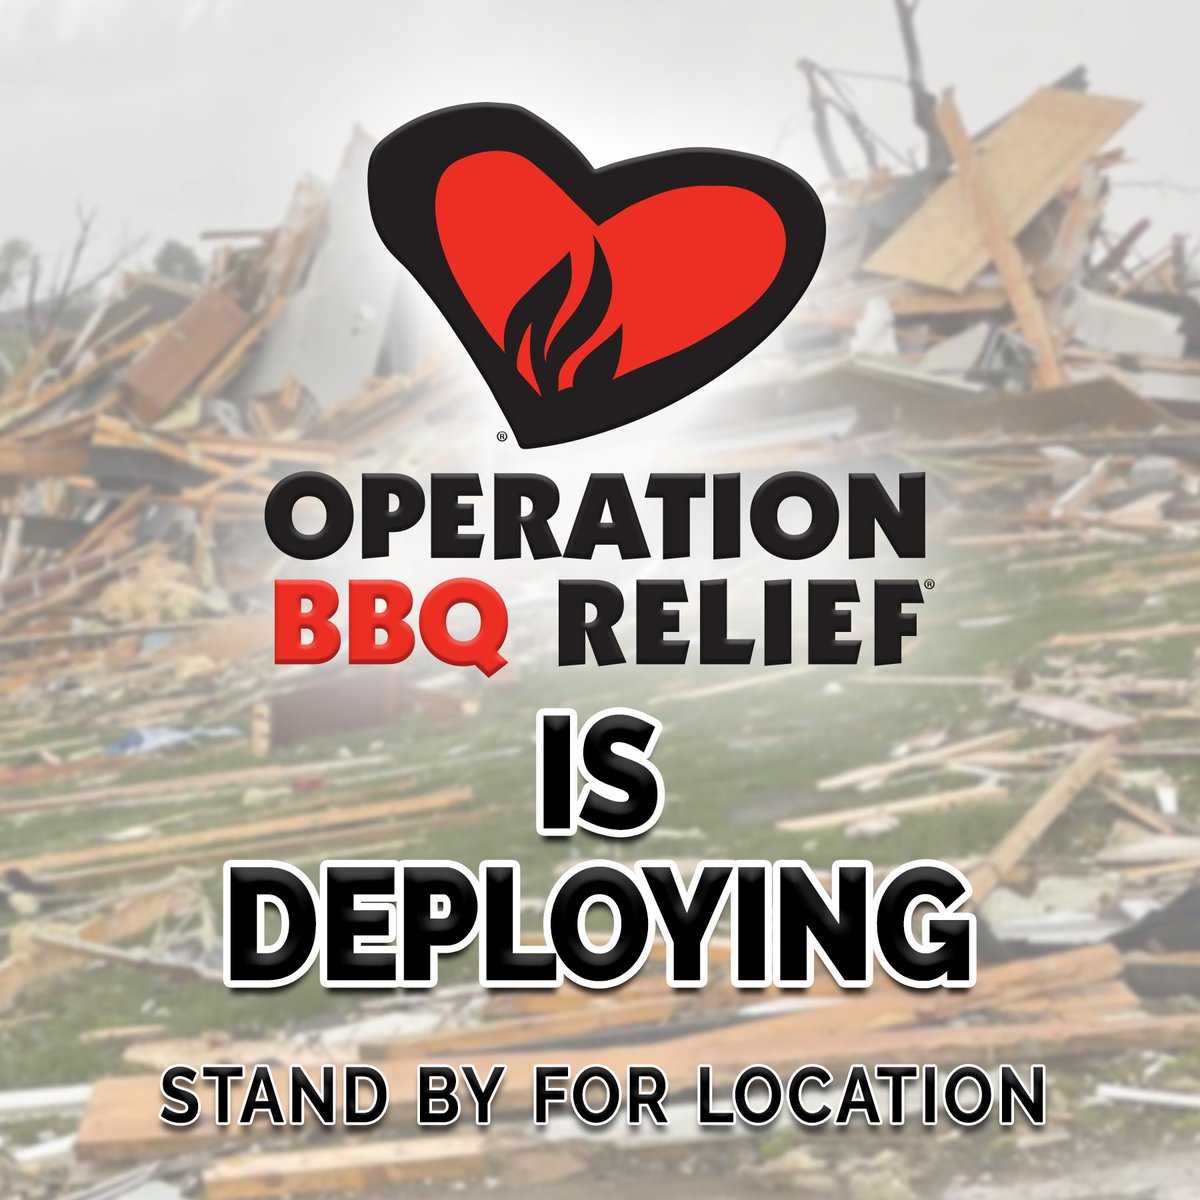 Operation BBQ Relief is deploying to Nebraska. Please stand by for specific location announcements. If you have any information or require assistance, including mass feeding needs, please contact us at Operations@obr.org. Volunteer needs are unknown at this time.